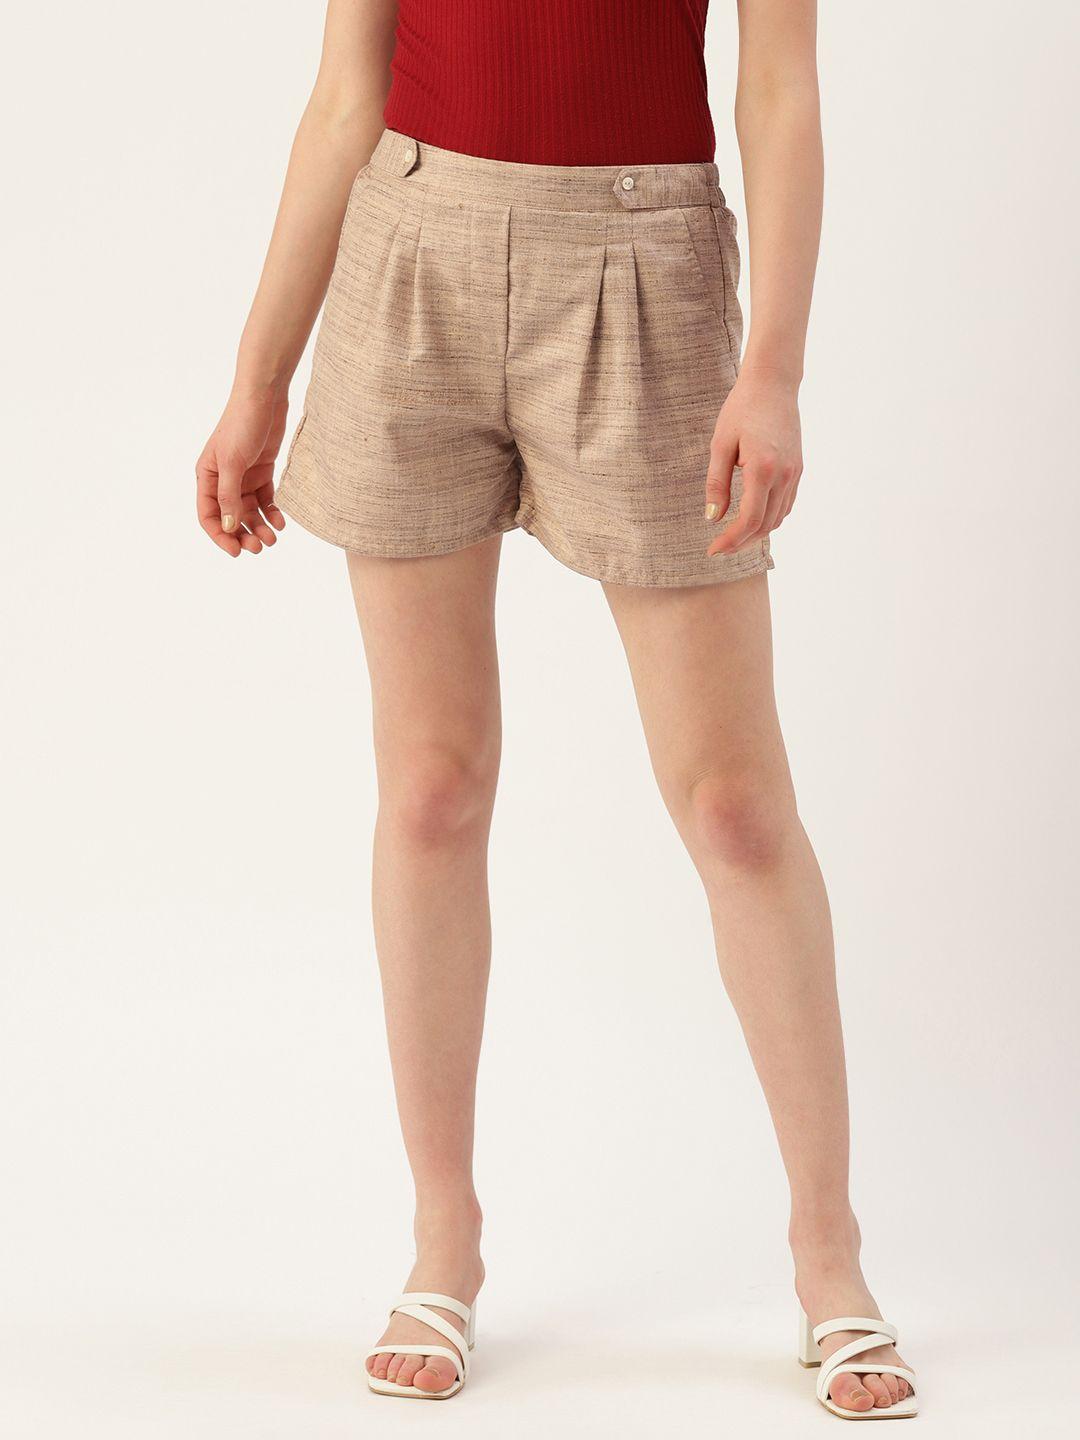 off label women mid-rise shorts